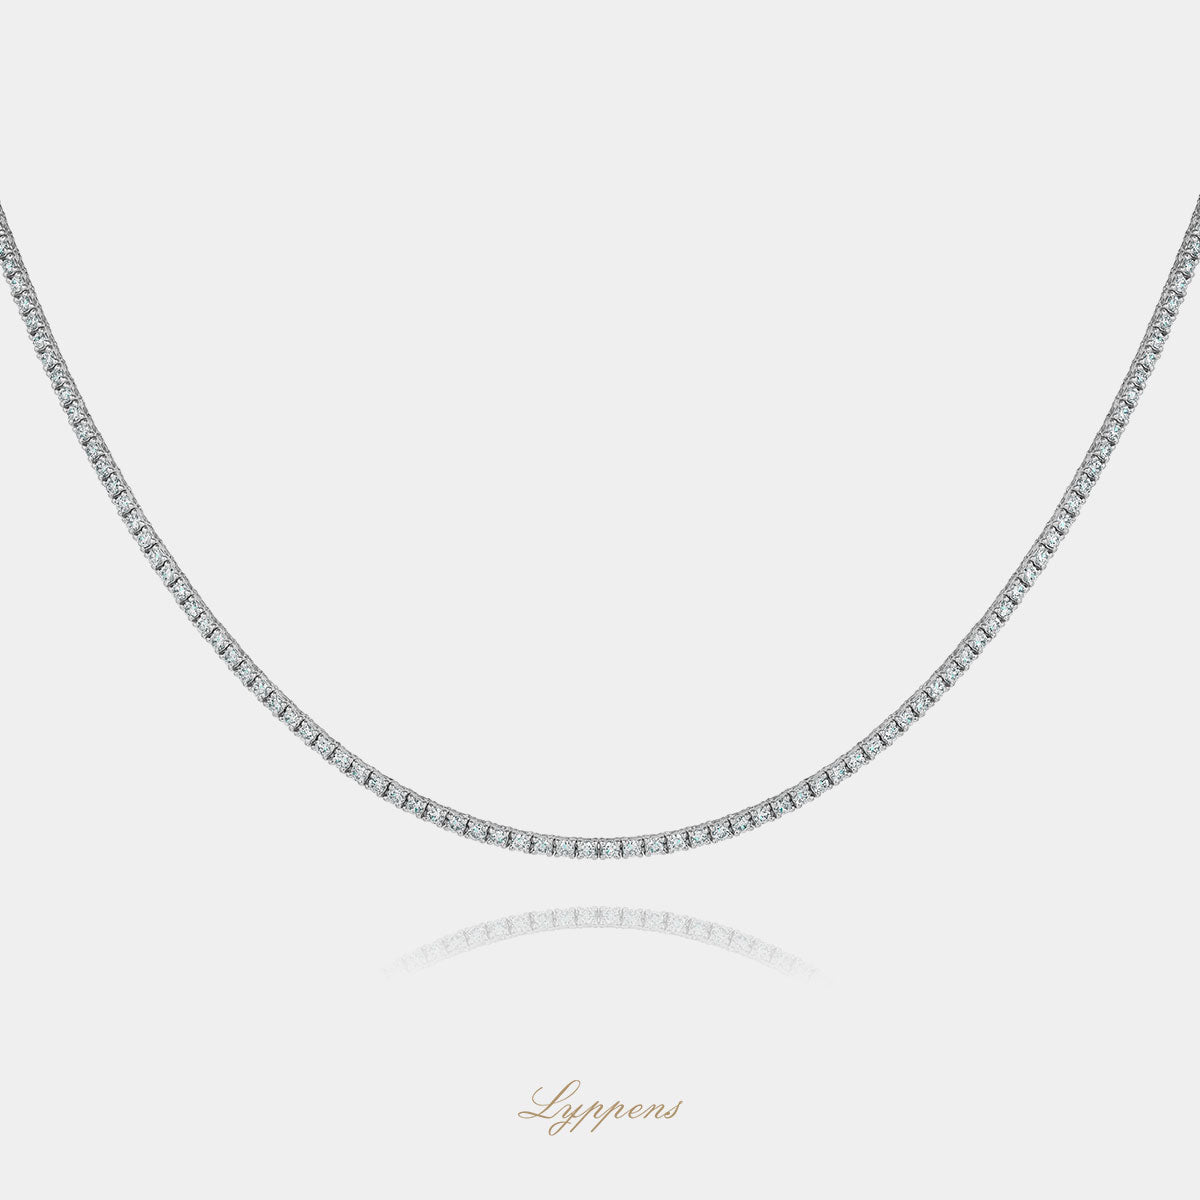 White gold tennis necklace with diamond 3.00ct